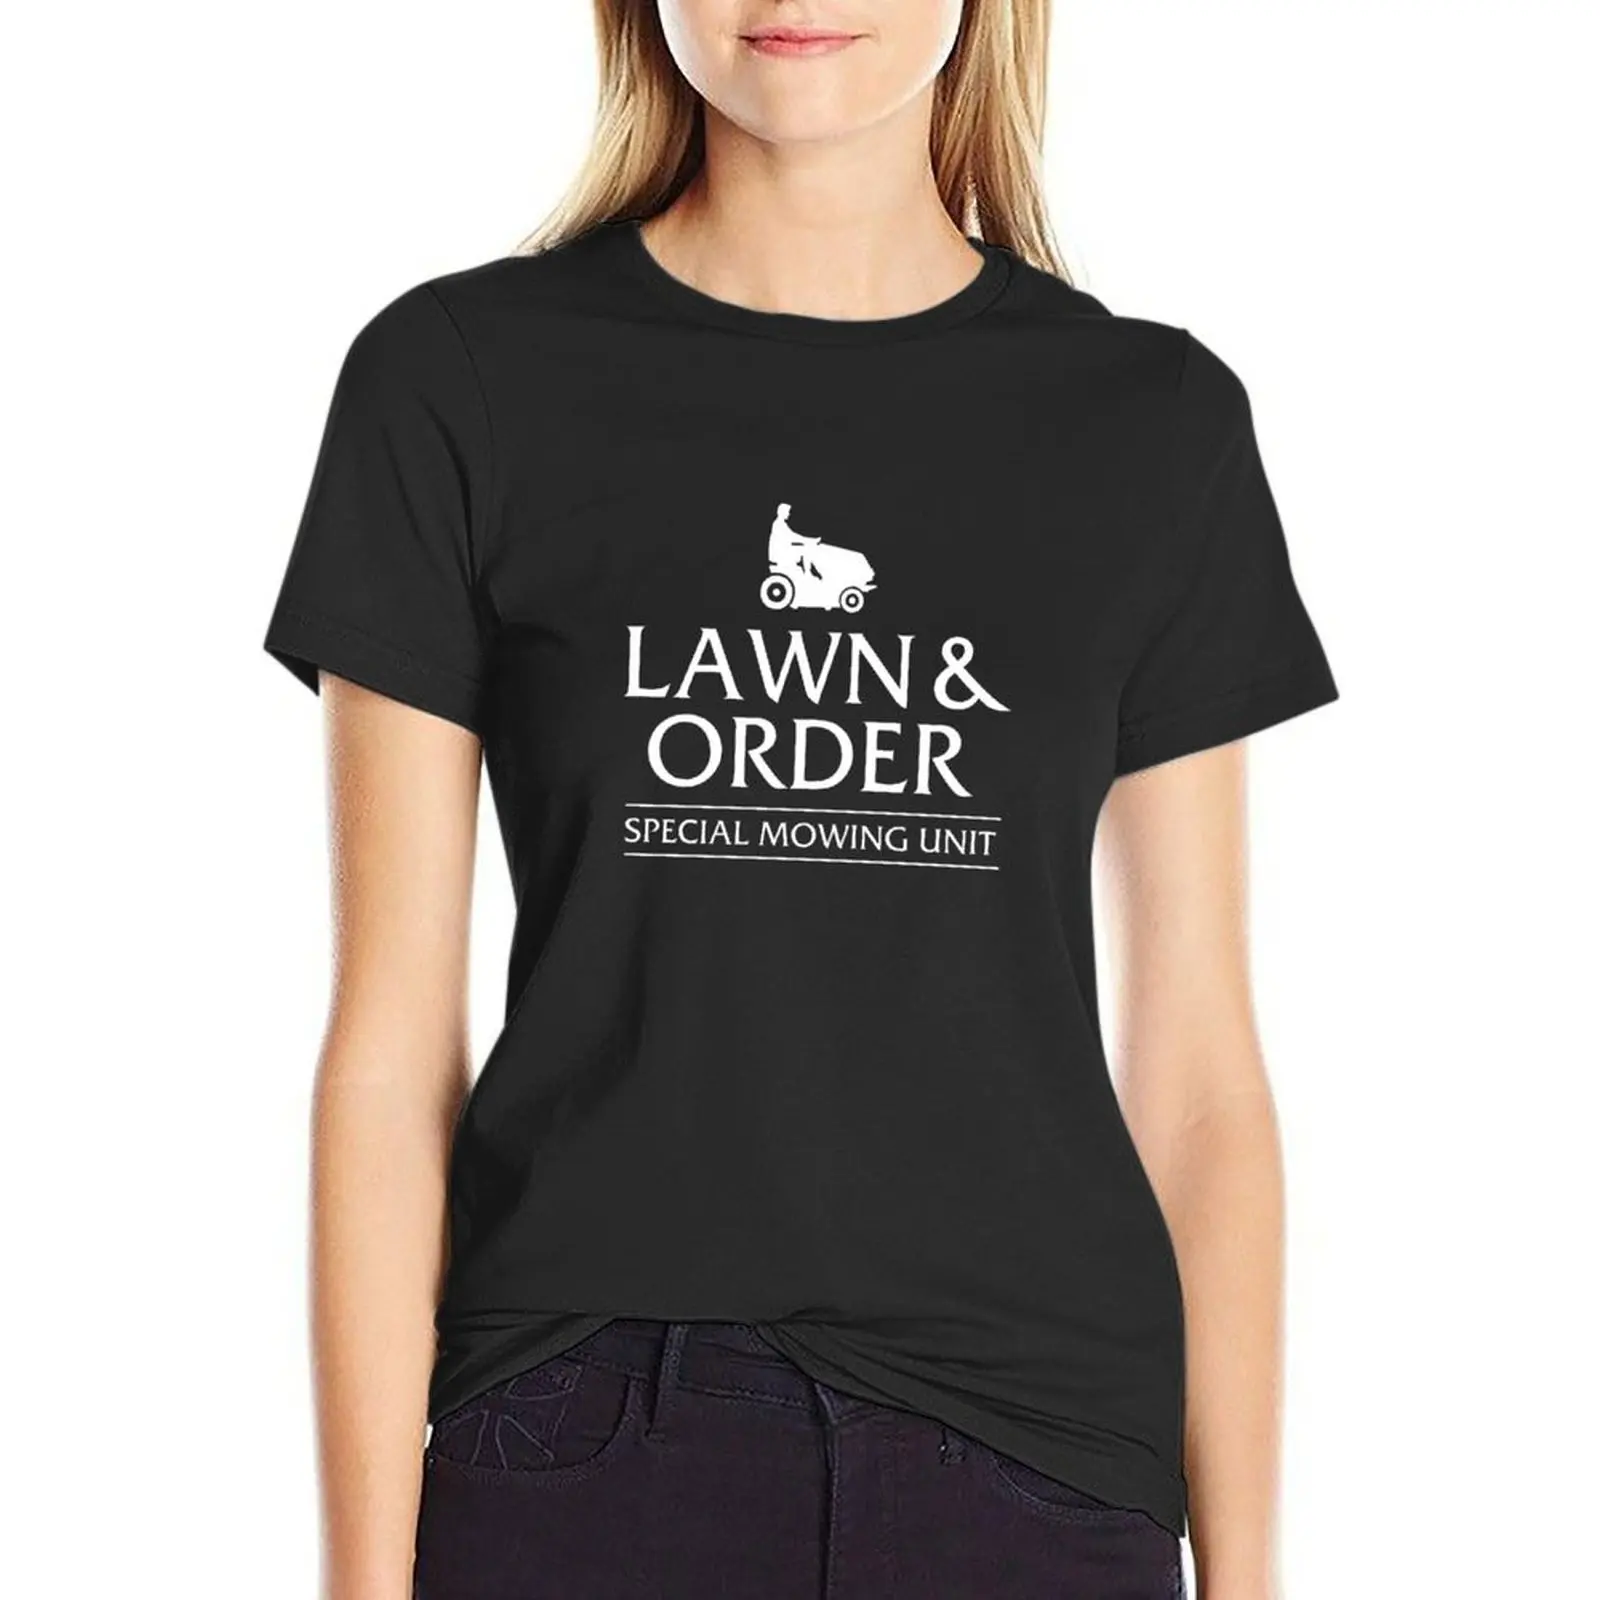 

Lawn and Order special mowing unit T-shirt cute clothes plus size tops Womens graphic t shirts